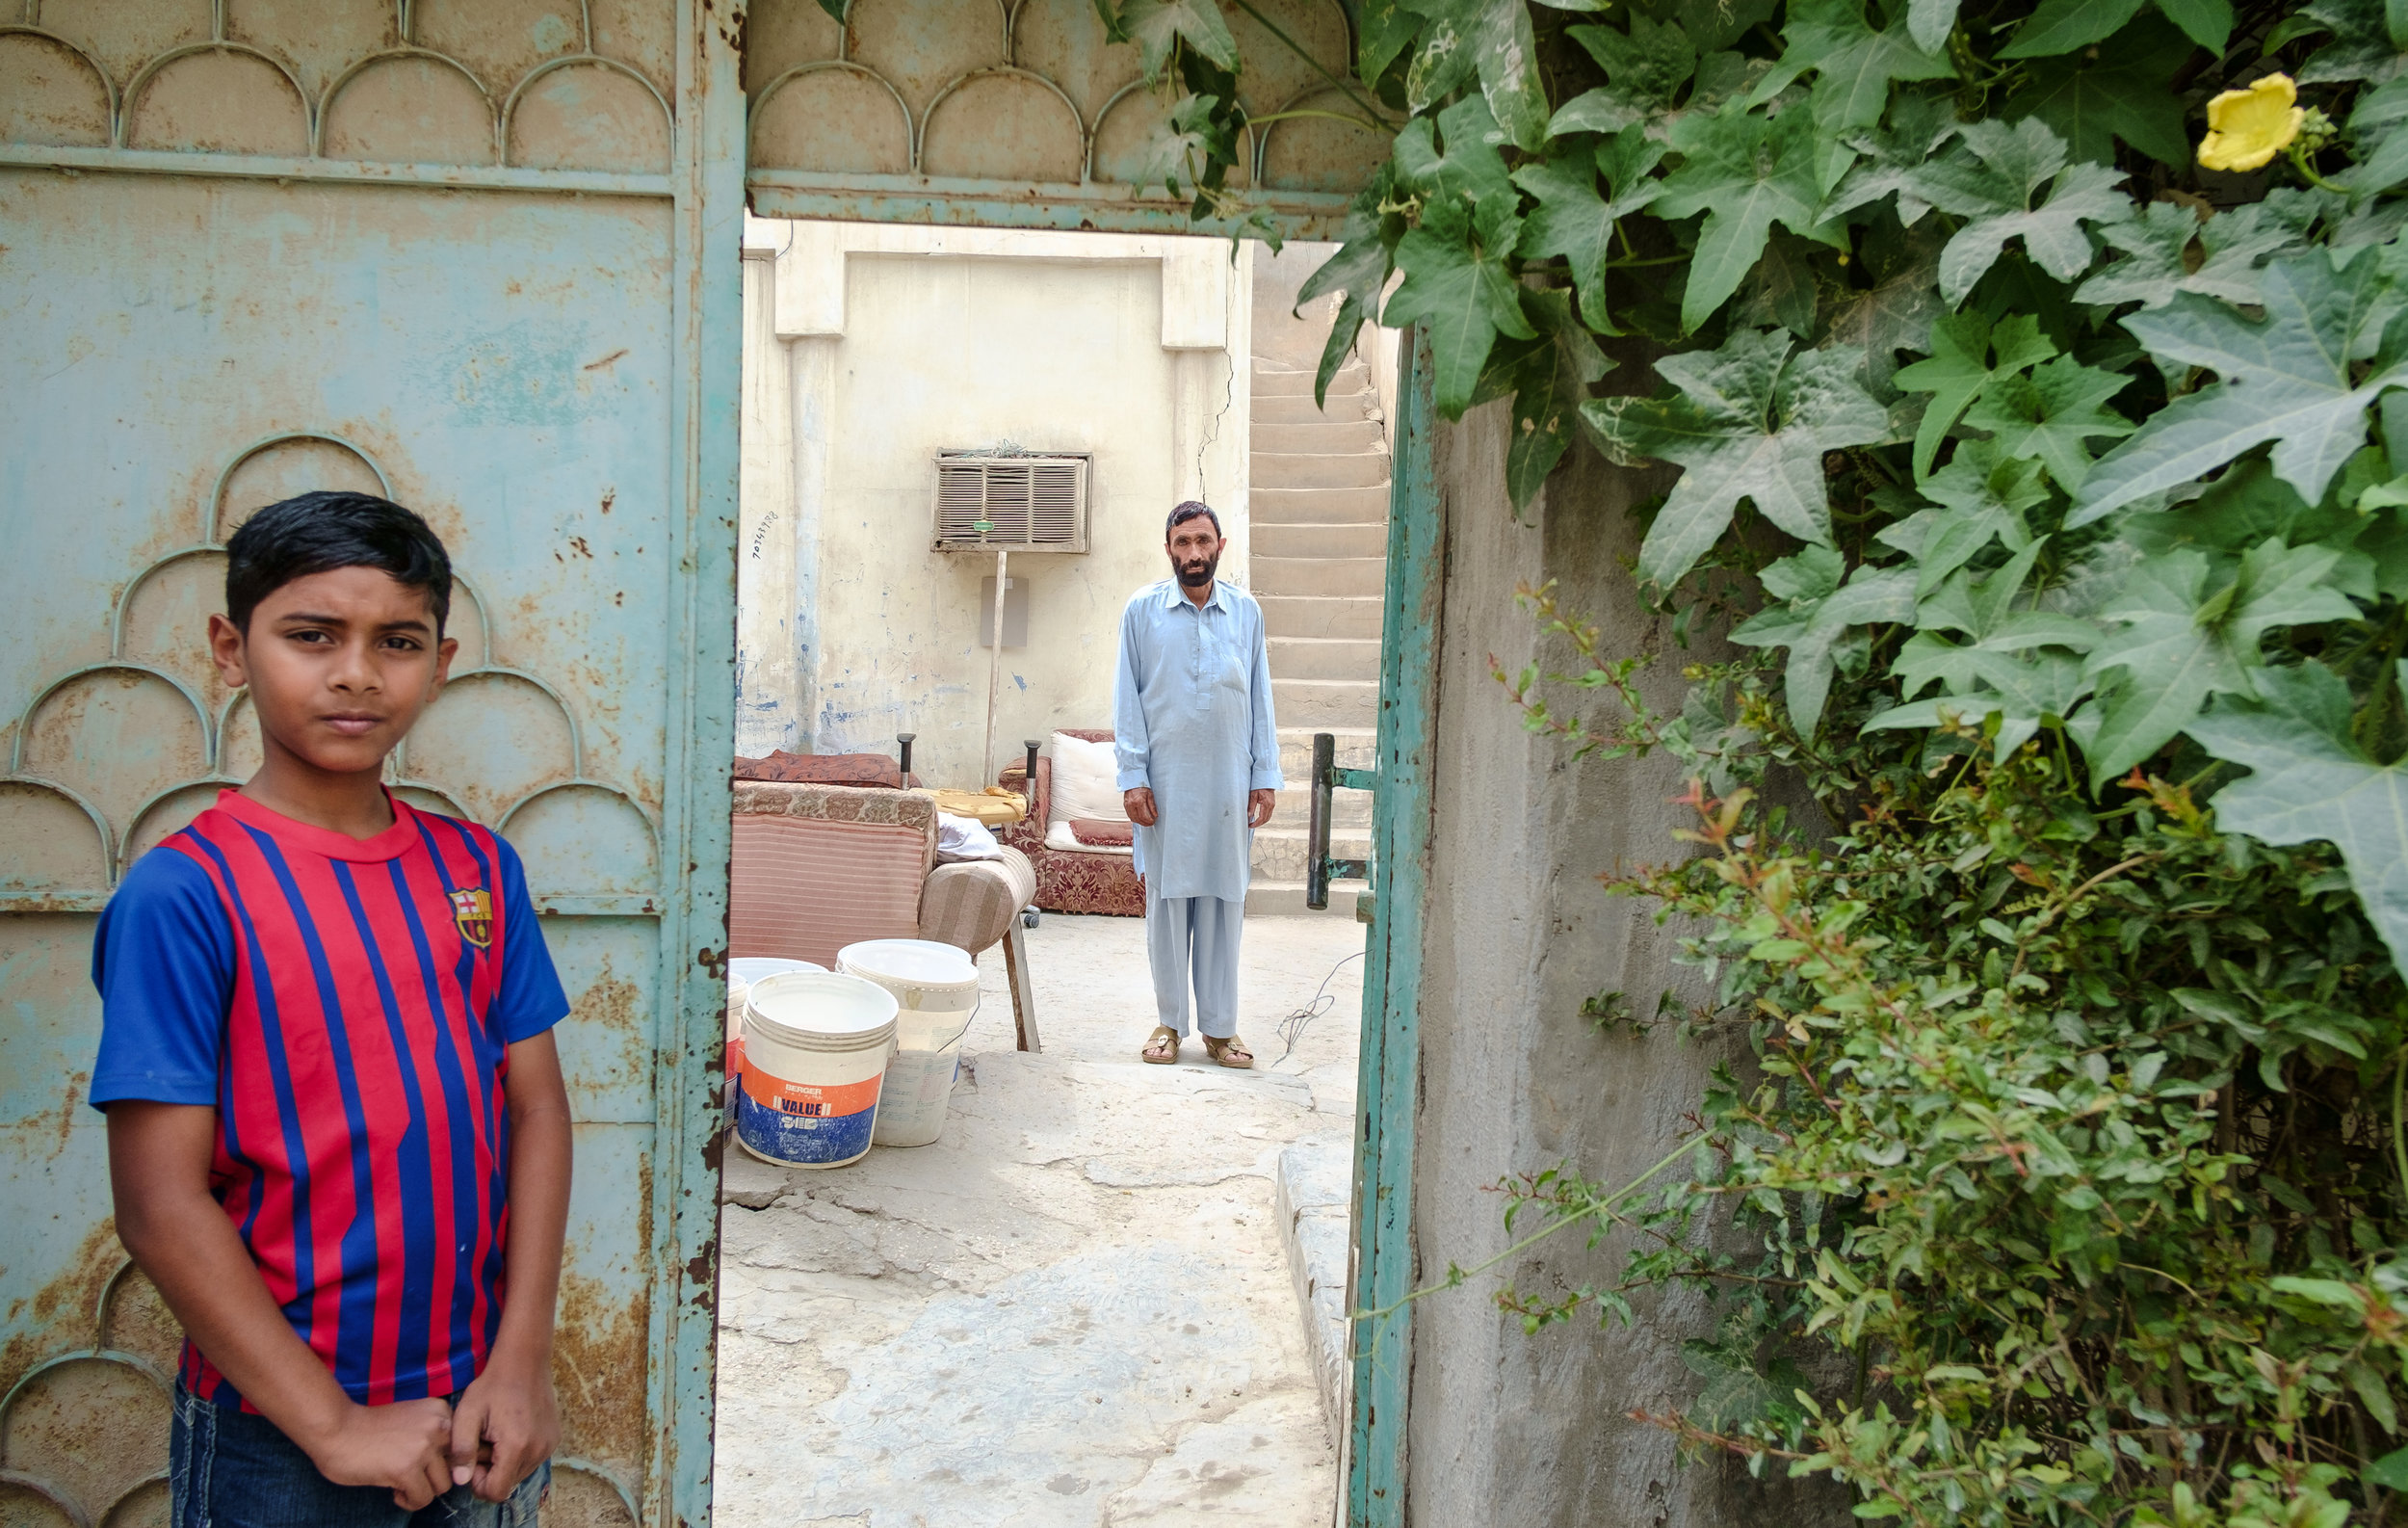  A boy and his neighbor are seen in the old Musheireb neighborhood of Doha. Much of this neighborhood has been torn down, and the residents forcibly removed, in order to build the New Msheireb development. Qatar is in a race to revitalize and moderni